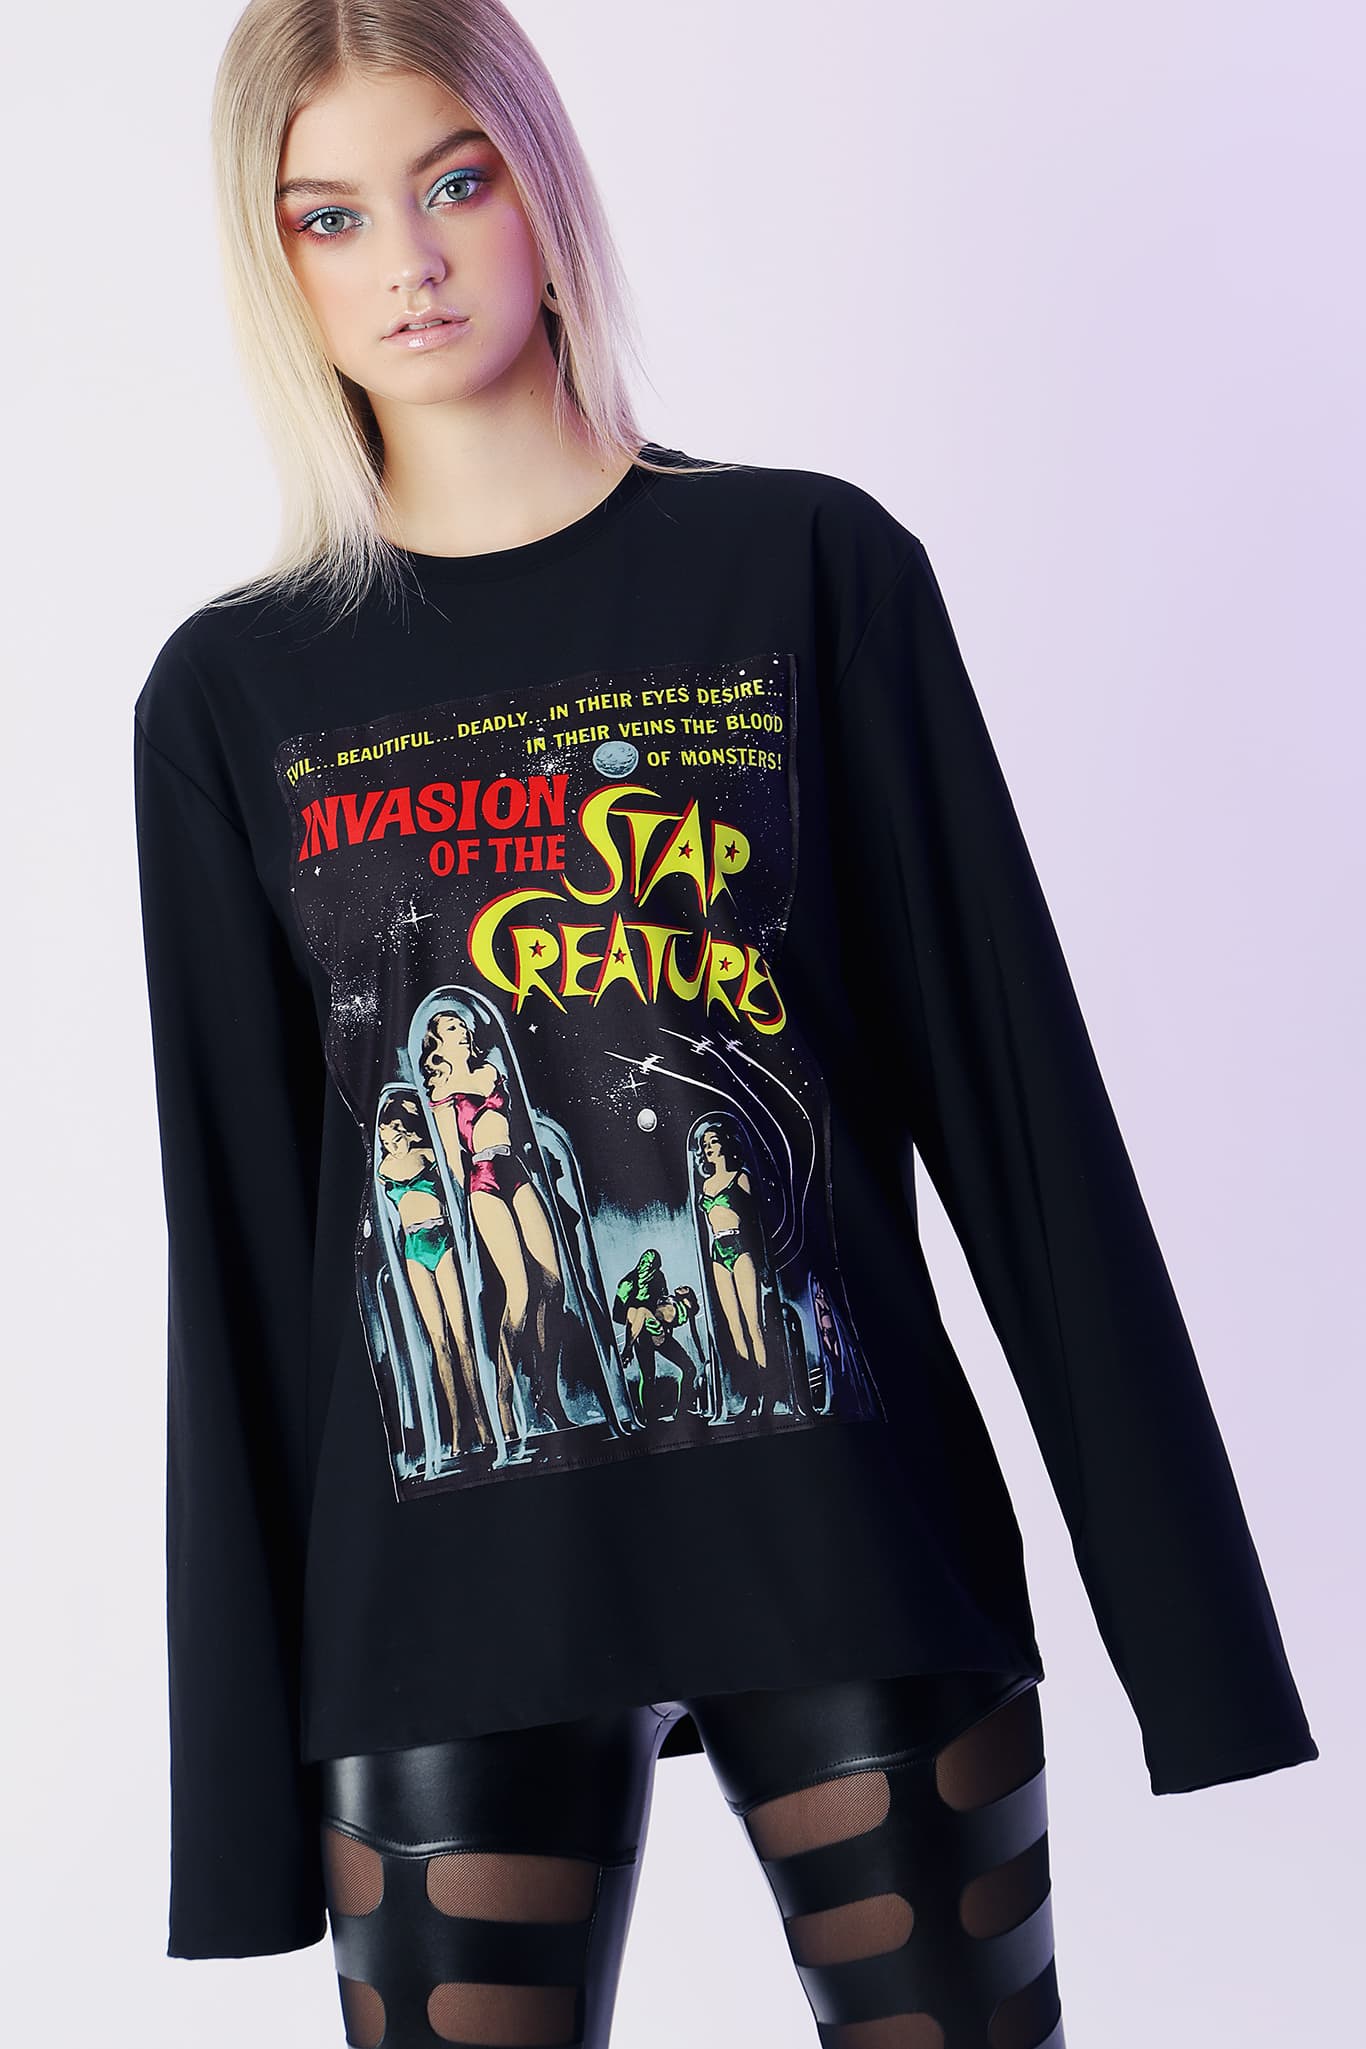 Star Creatures Patch Sweater - Limited